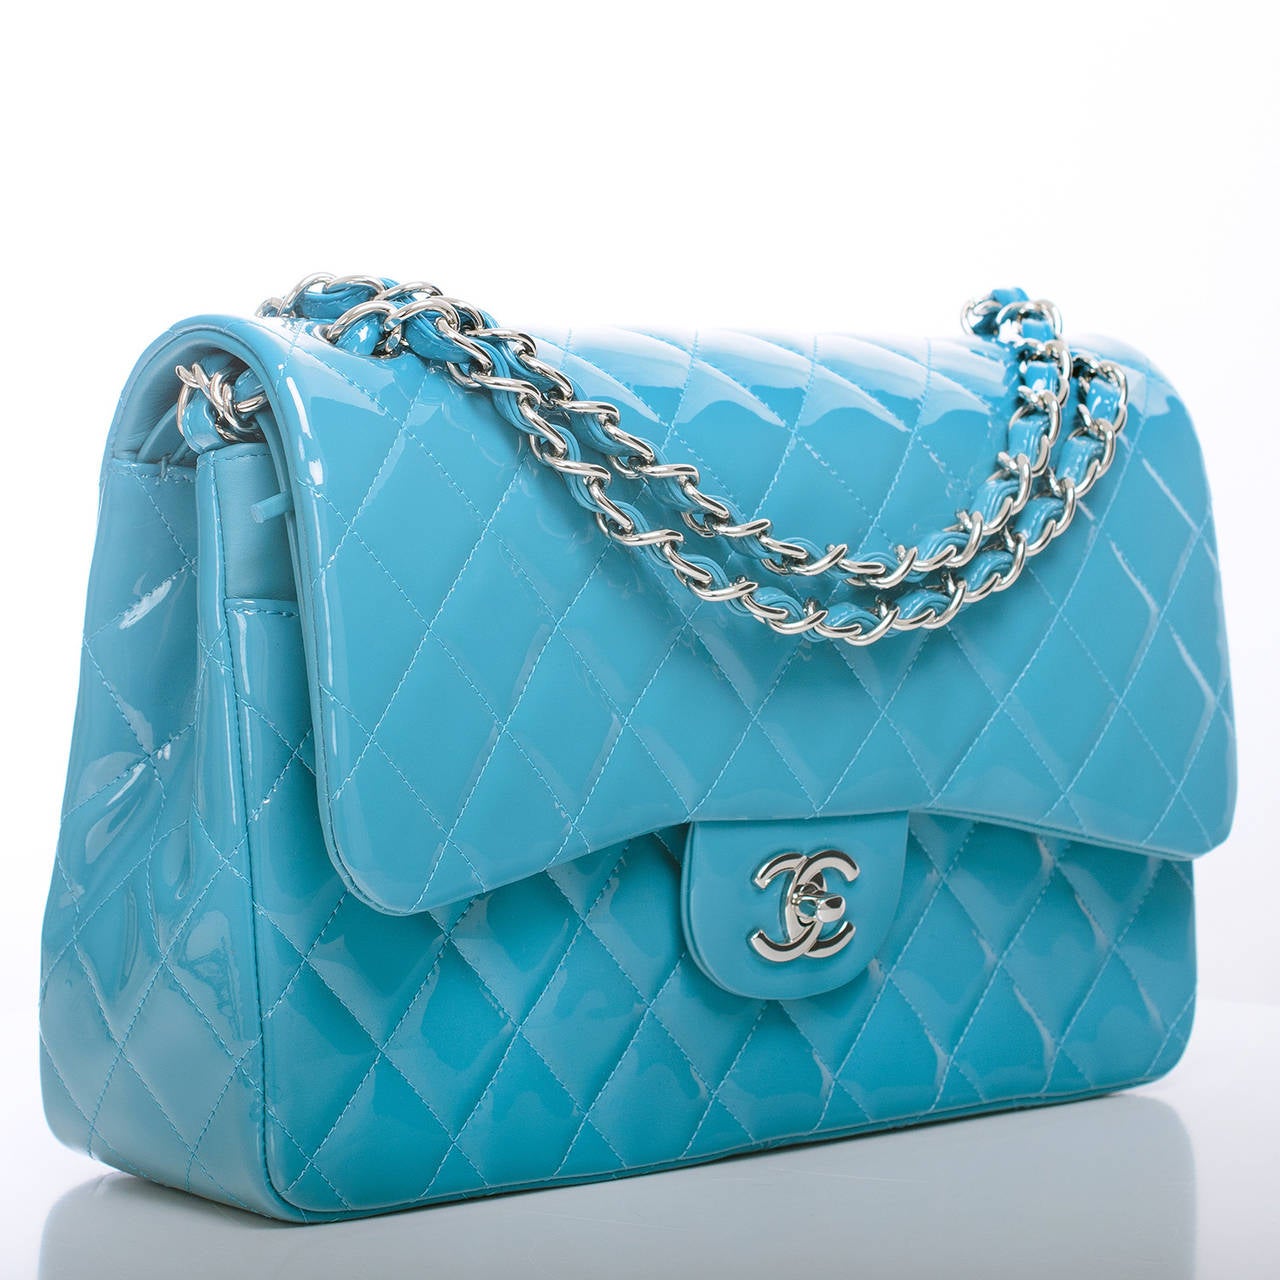 Chanel turquoise blue Jumbo Classic 2.55 double flap bag of quilted patent leather with silver tone hardware.

Named 2.55 to honor the bag's creation in February 1955, the iconic Chanel bag was a modification of the bag Coco Chanel originally